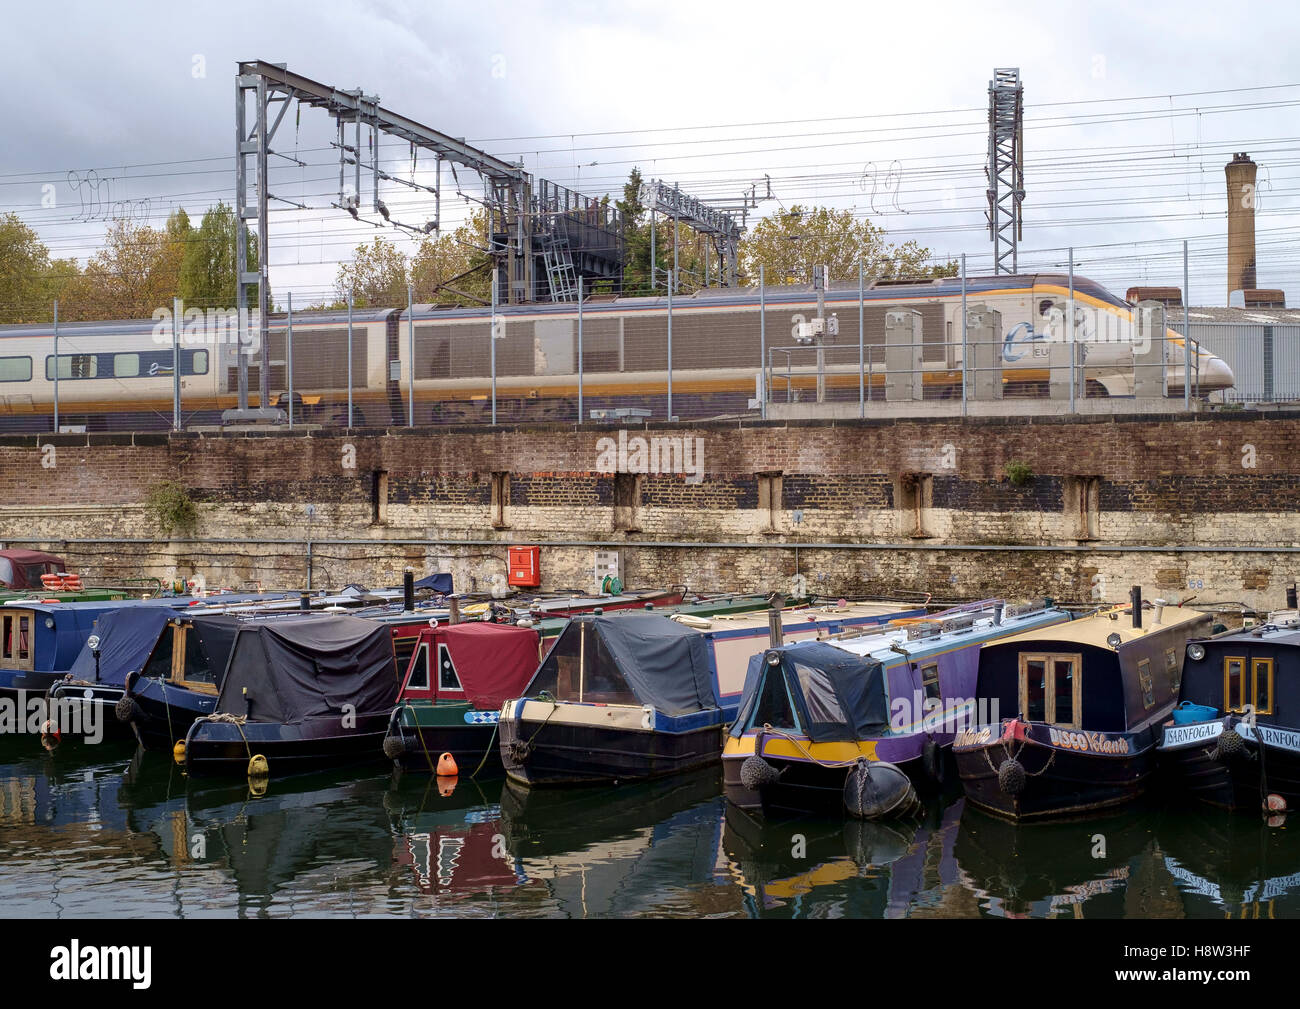 The Regents Canal at St Pancras in London.  A Eurostar train runs  besides a canal basin of moored narrowboats. Stock Photo